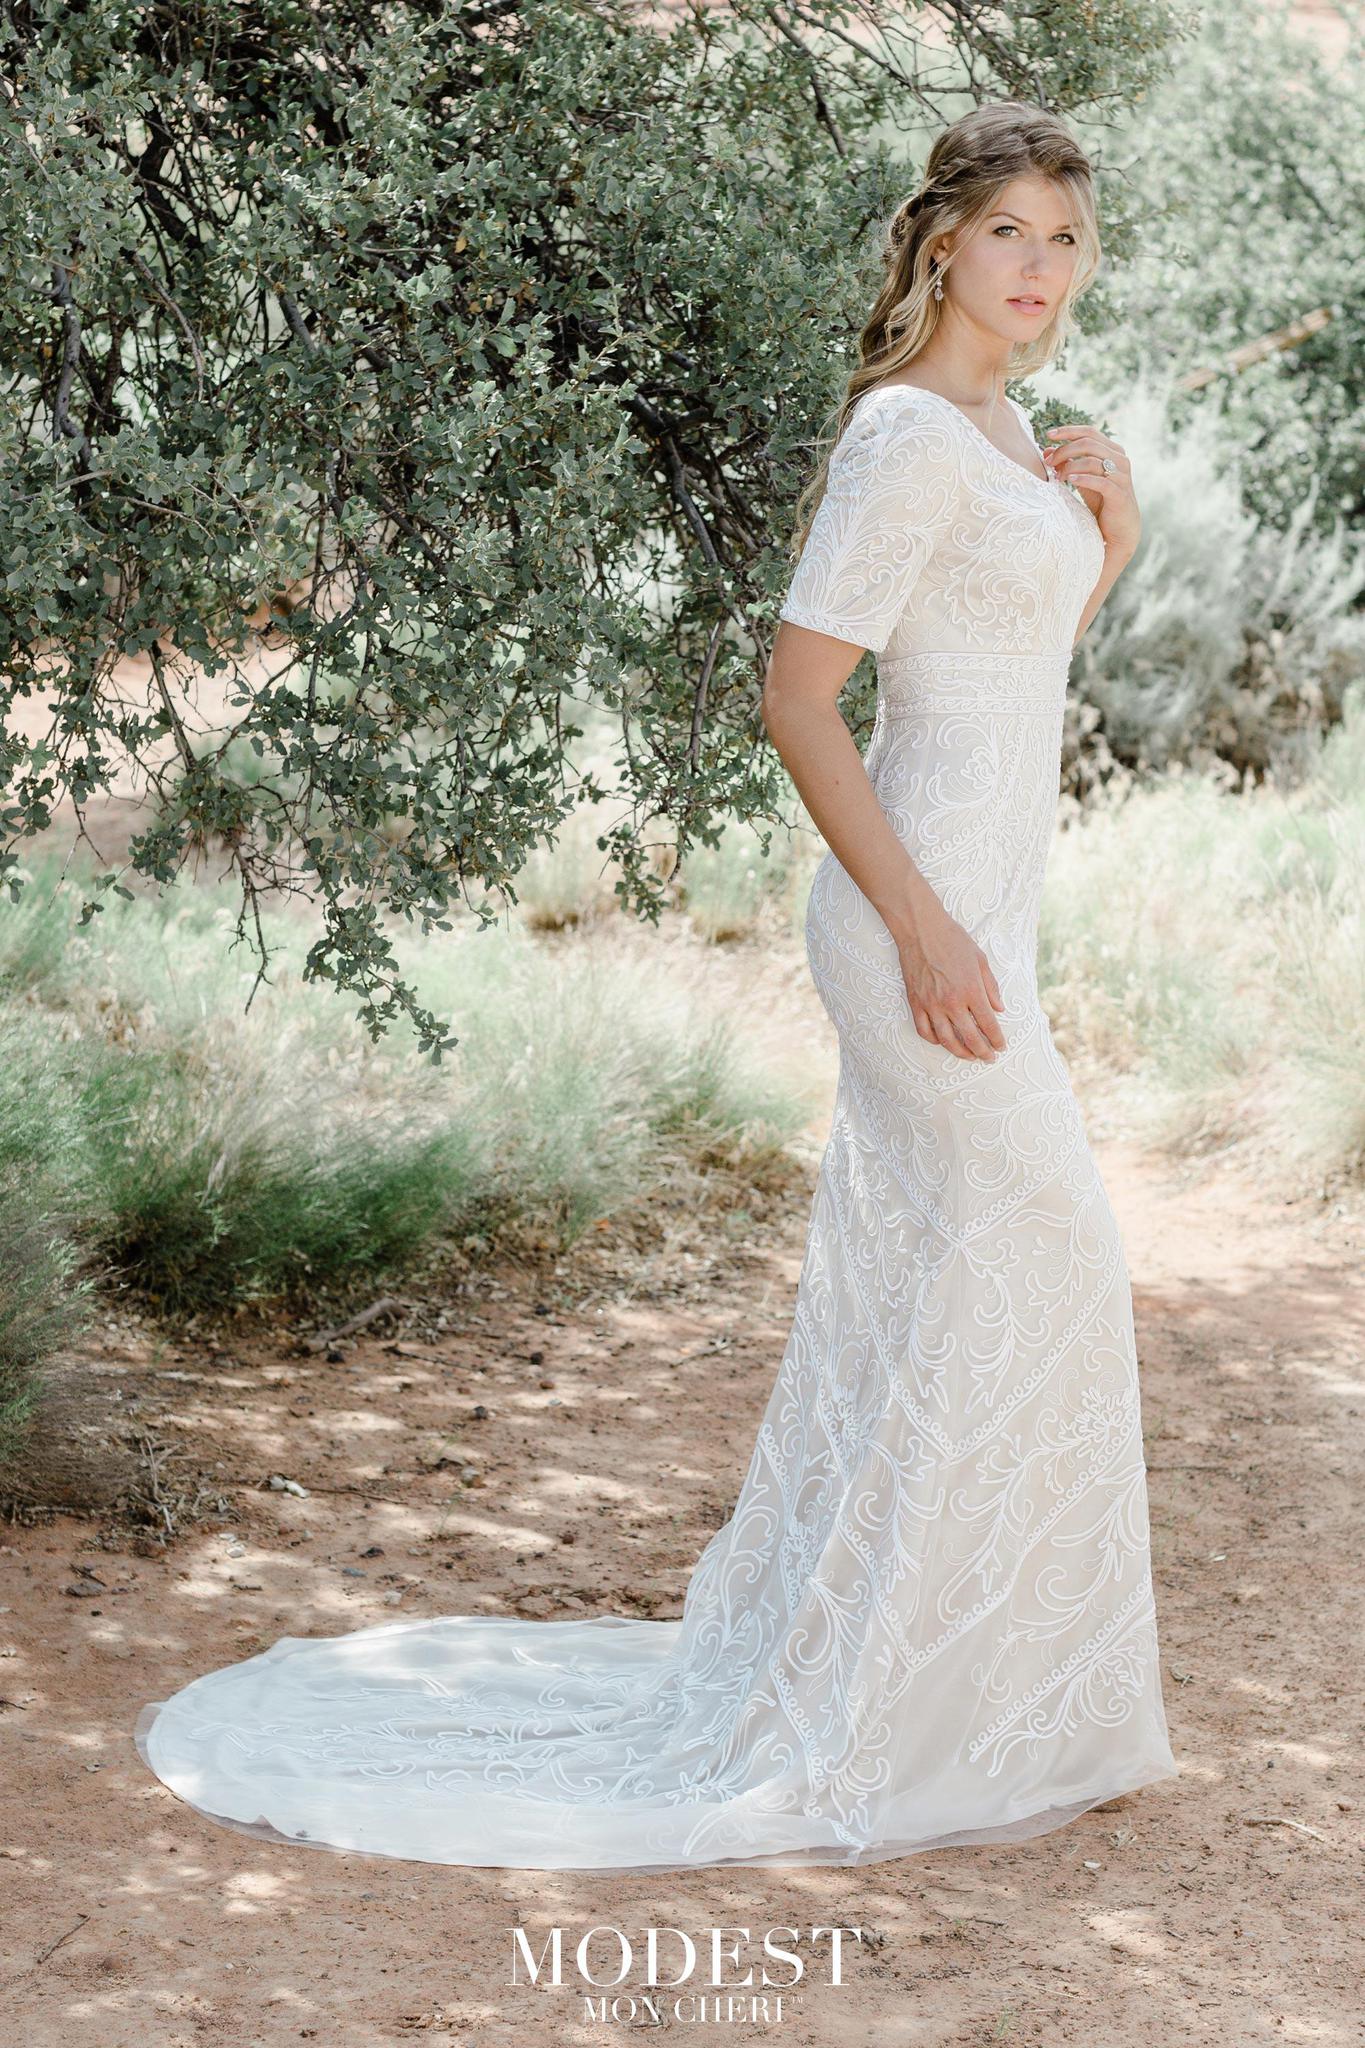 Top Modest Wedding Dresses With 3 4 Sleeves of all time Don t miss out 